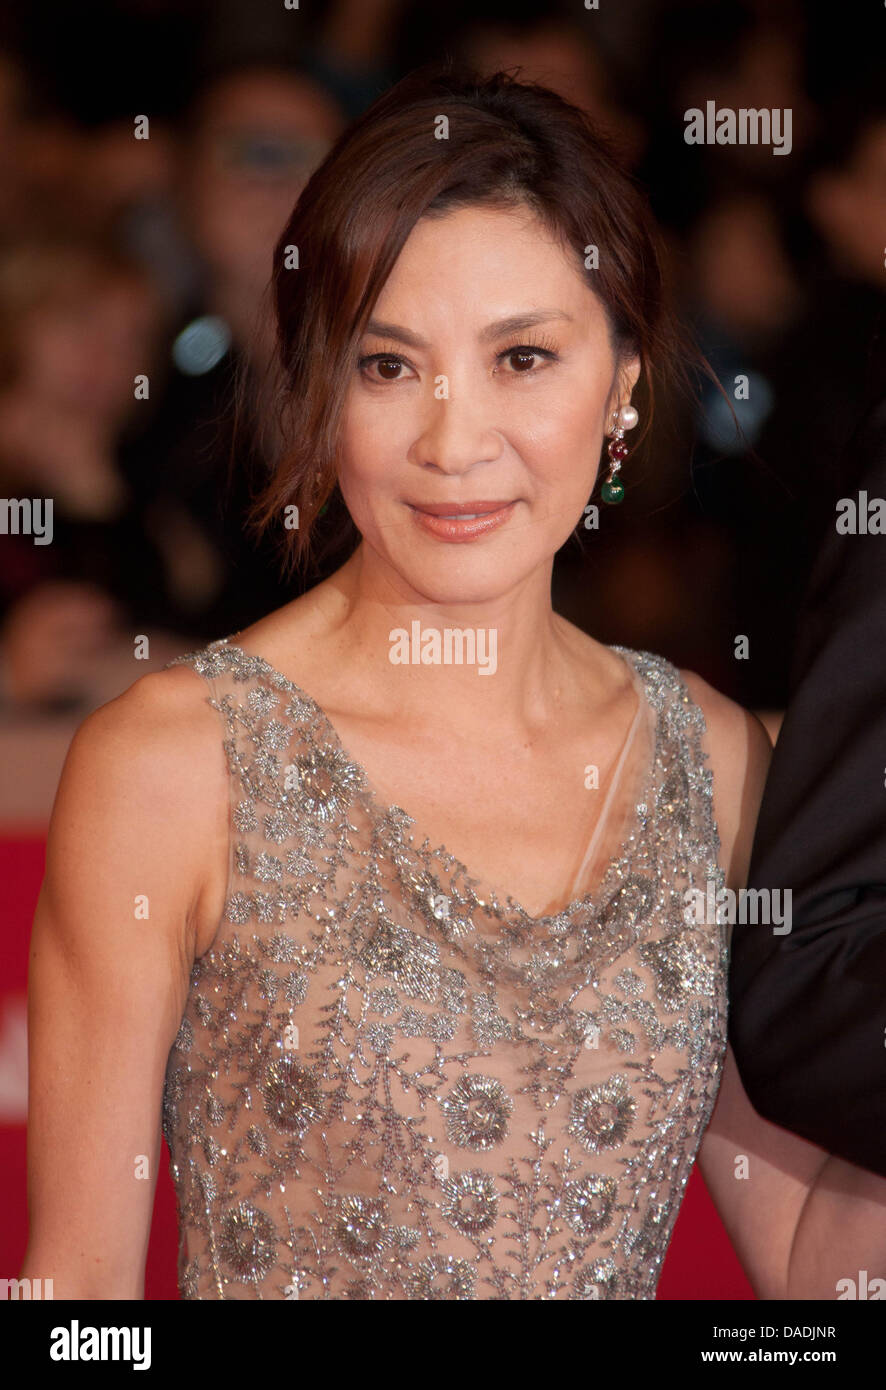 Actress Michelle Yeoh (wearing a Valentino dress and jewelry by Bulgari) attends the premiere of 'The Lady' during the 6th International Rome Film Festival at Auditorium Parco Della Musica in Rome, Italy, on 27 October 2011. Photo: Hubert Boesl Stock Photo